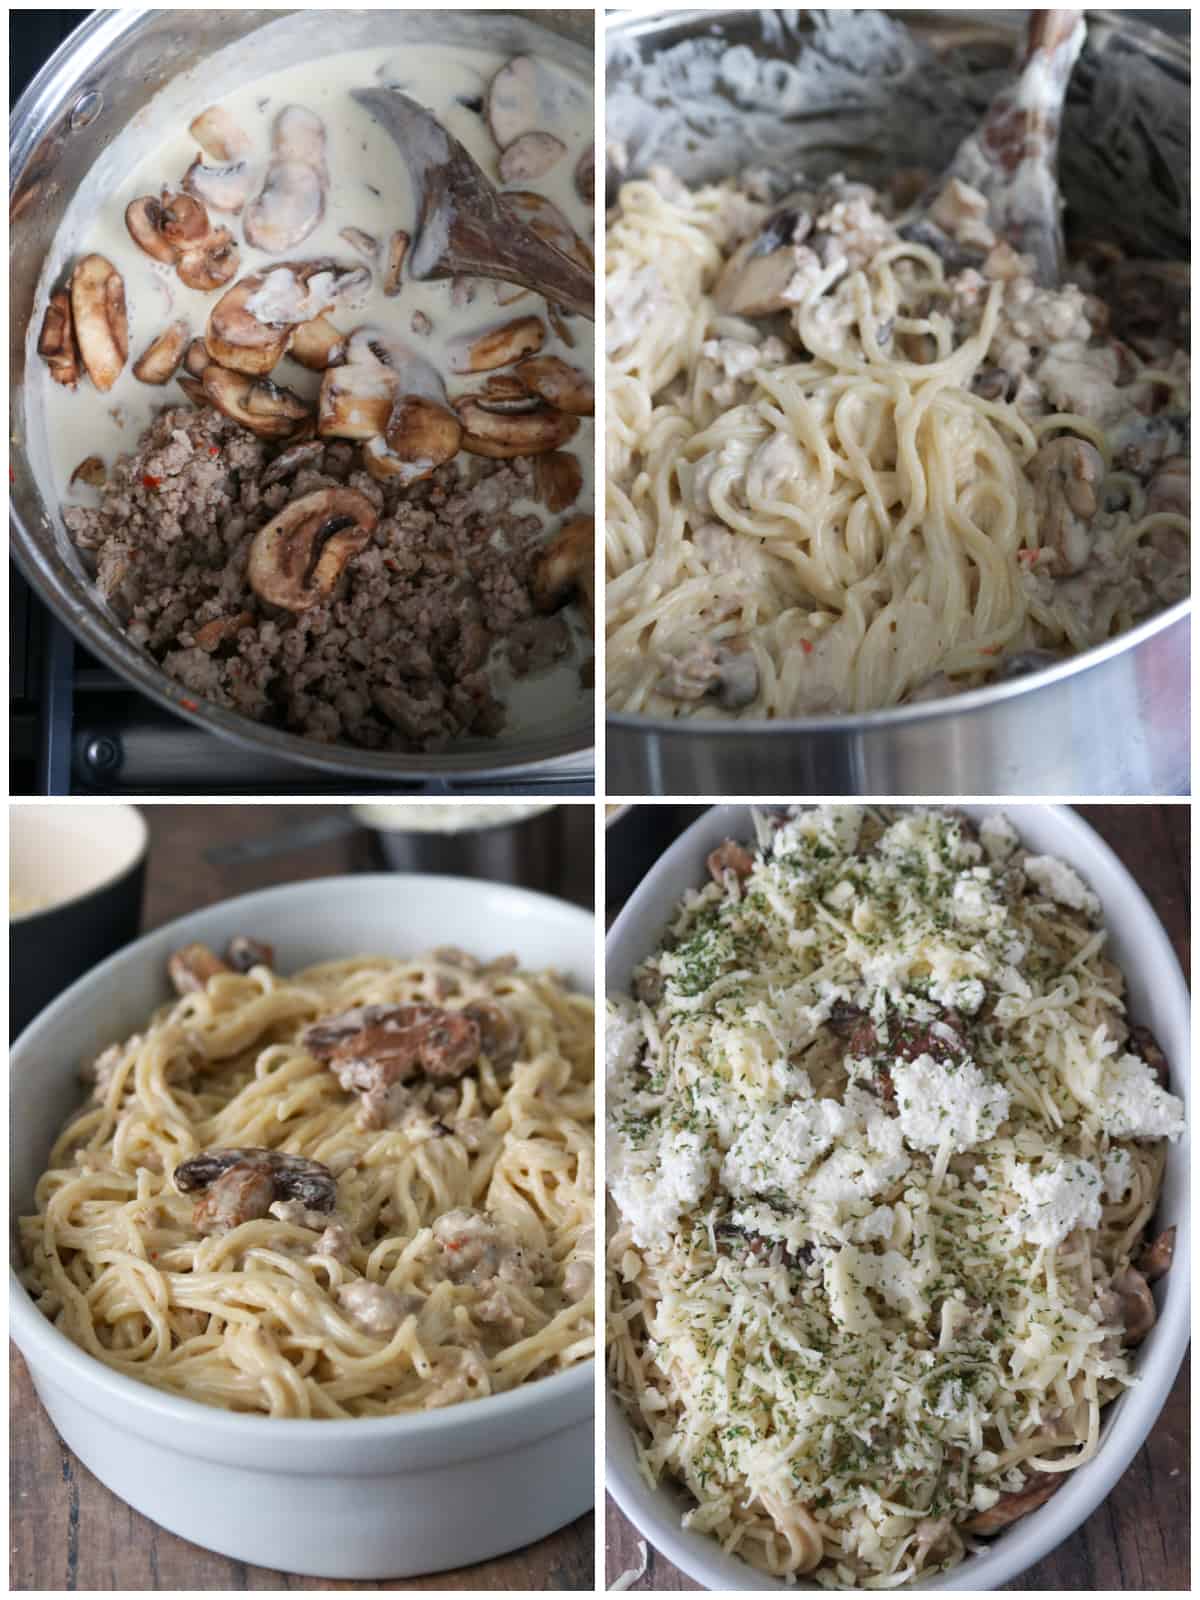 A collage showing mixing the ingredients of the pasta together. And the pasta transferred to the baking dish and topped with cheese.